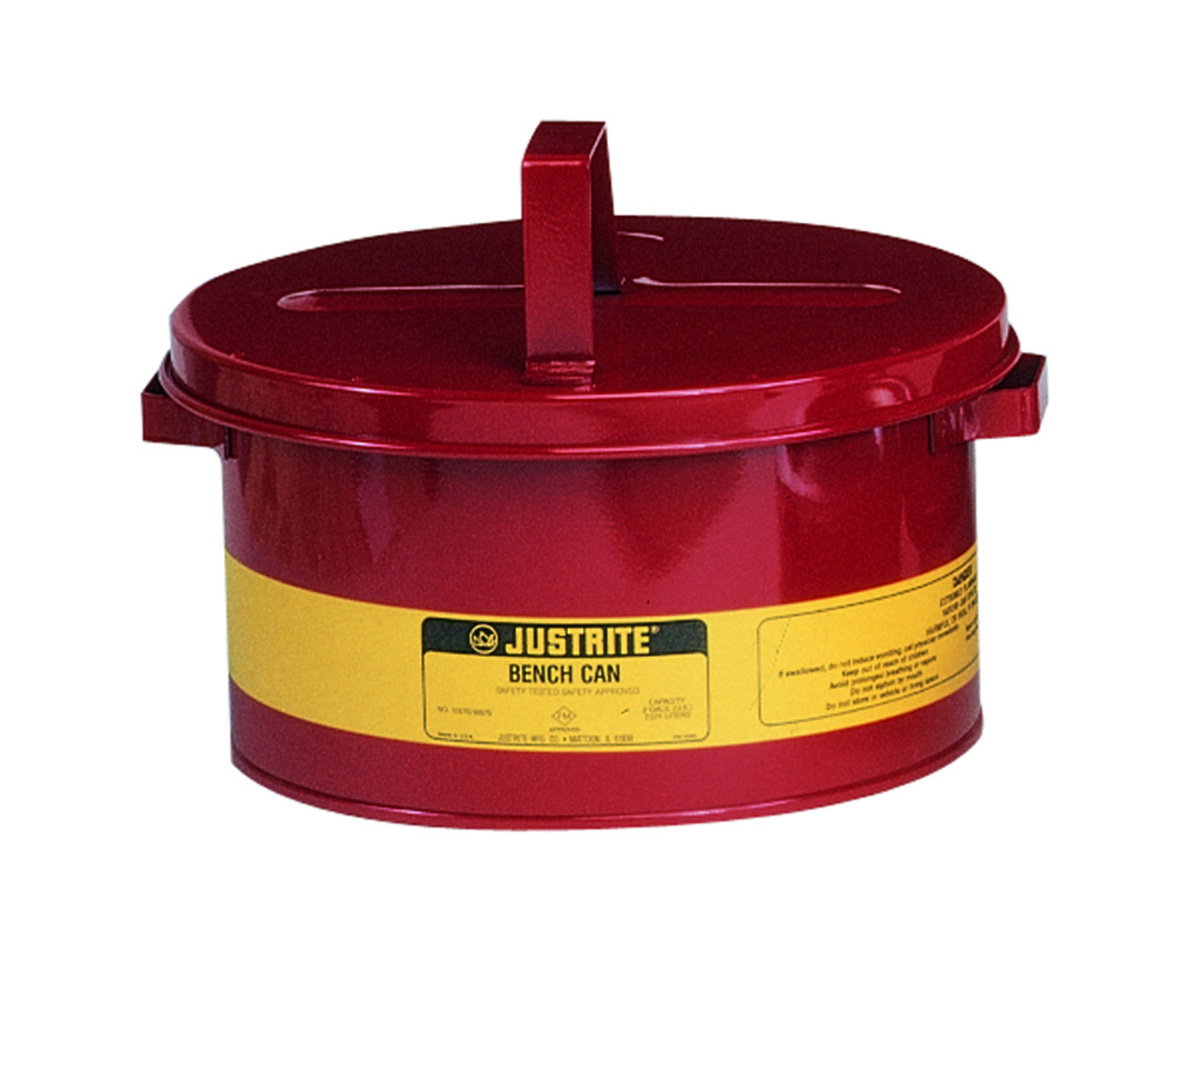 Justrite™ 2 Gallon Red Galvanized Steel Safety Bench Can With 9-3/4